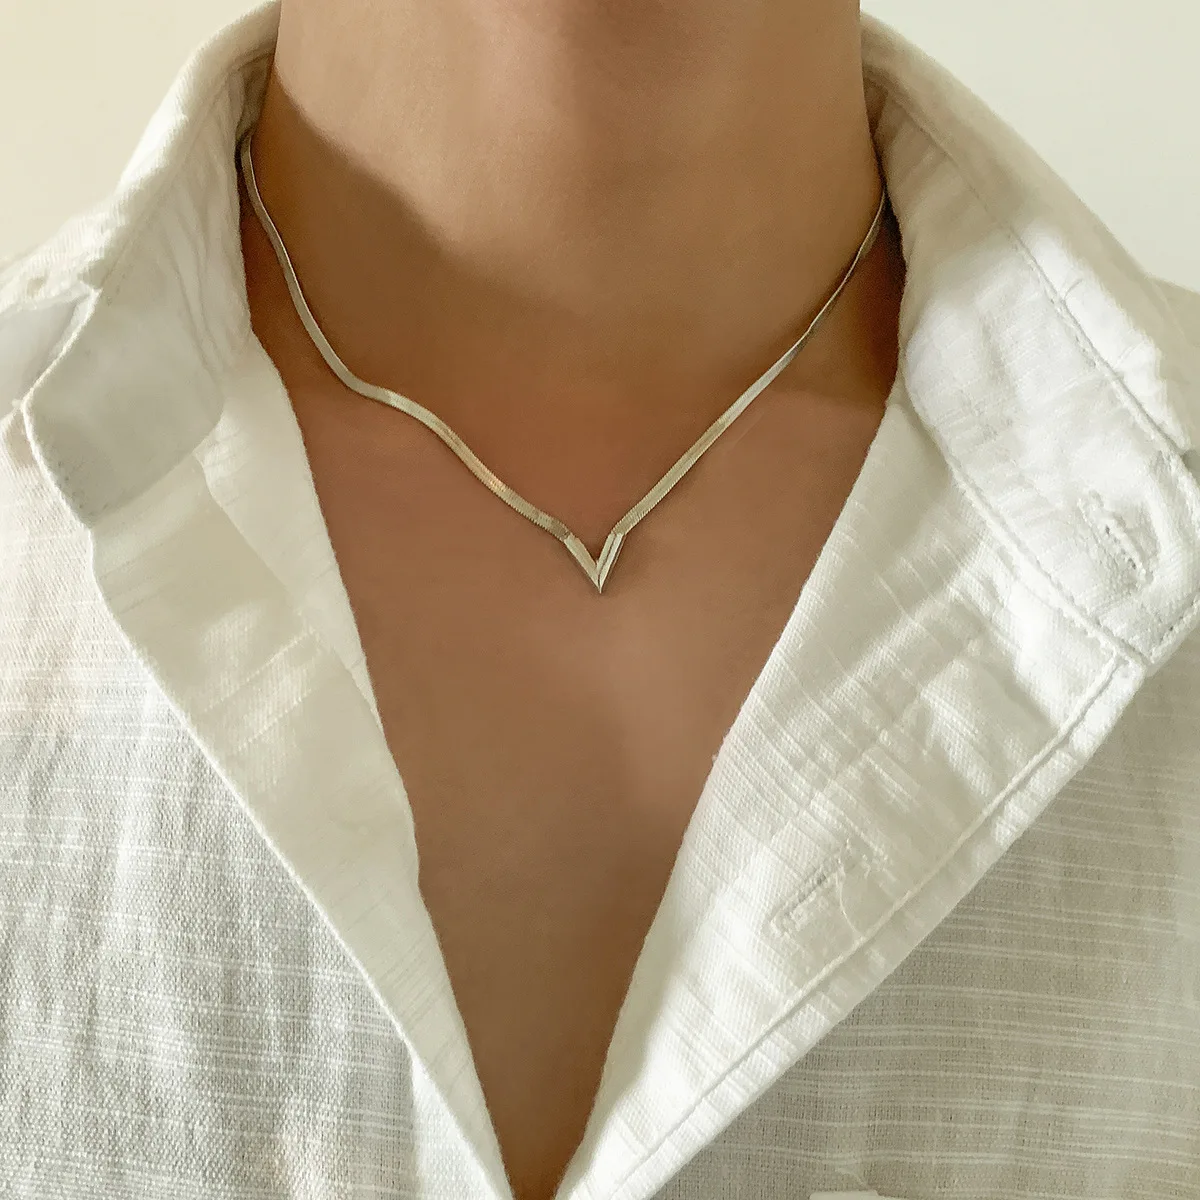 Simple Men's Jewelry Creative V-shaped Necklace For Women Men Flat Snake Chain Choker Fashion Blade Chains Neck Accessories Gift images - 6